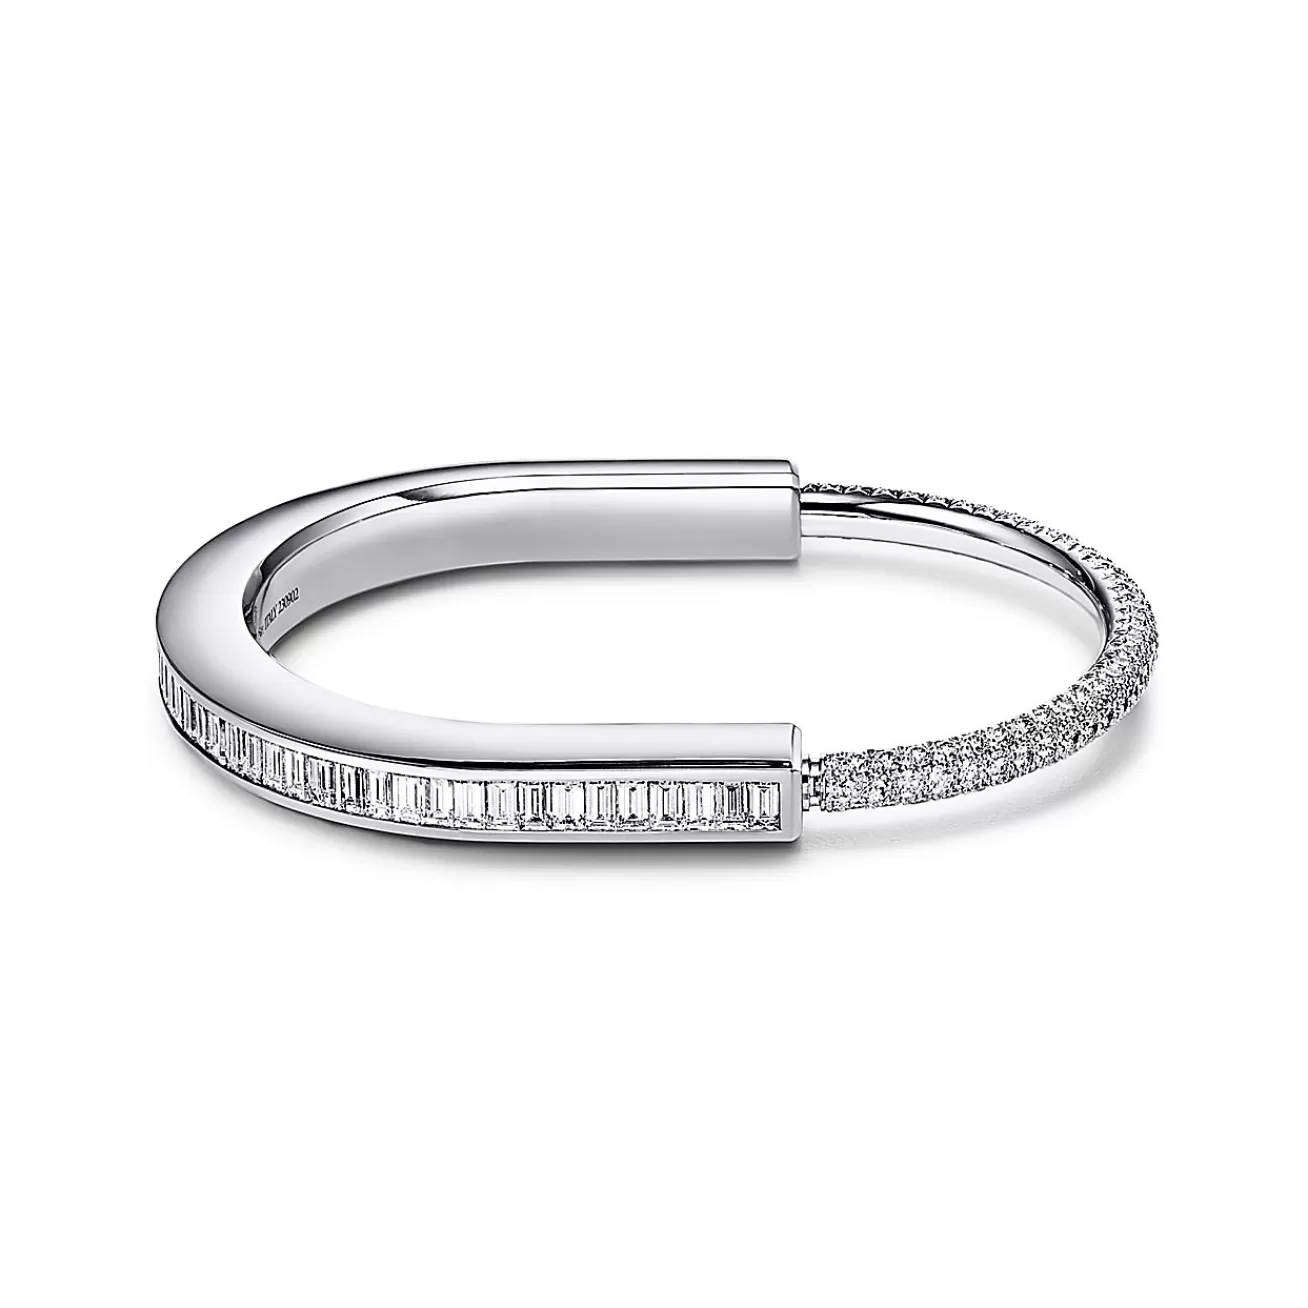 Tiffany & Co. Tiffany Lock Bangle in White Gold with Baguette and Pavé Diamonds | ^ Bracelets | Diamond Jewelry